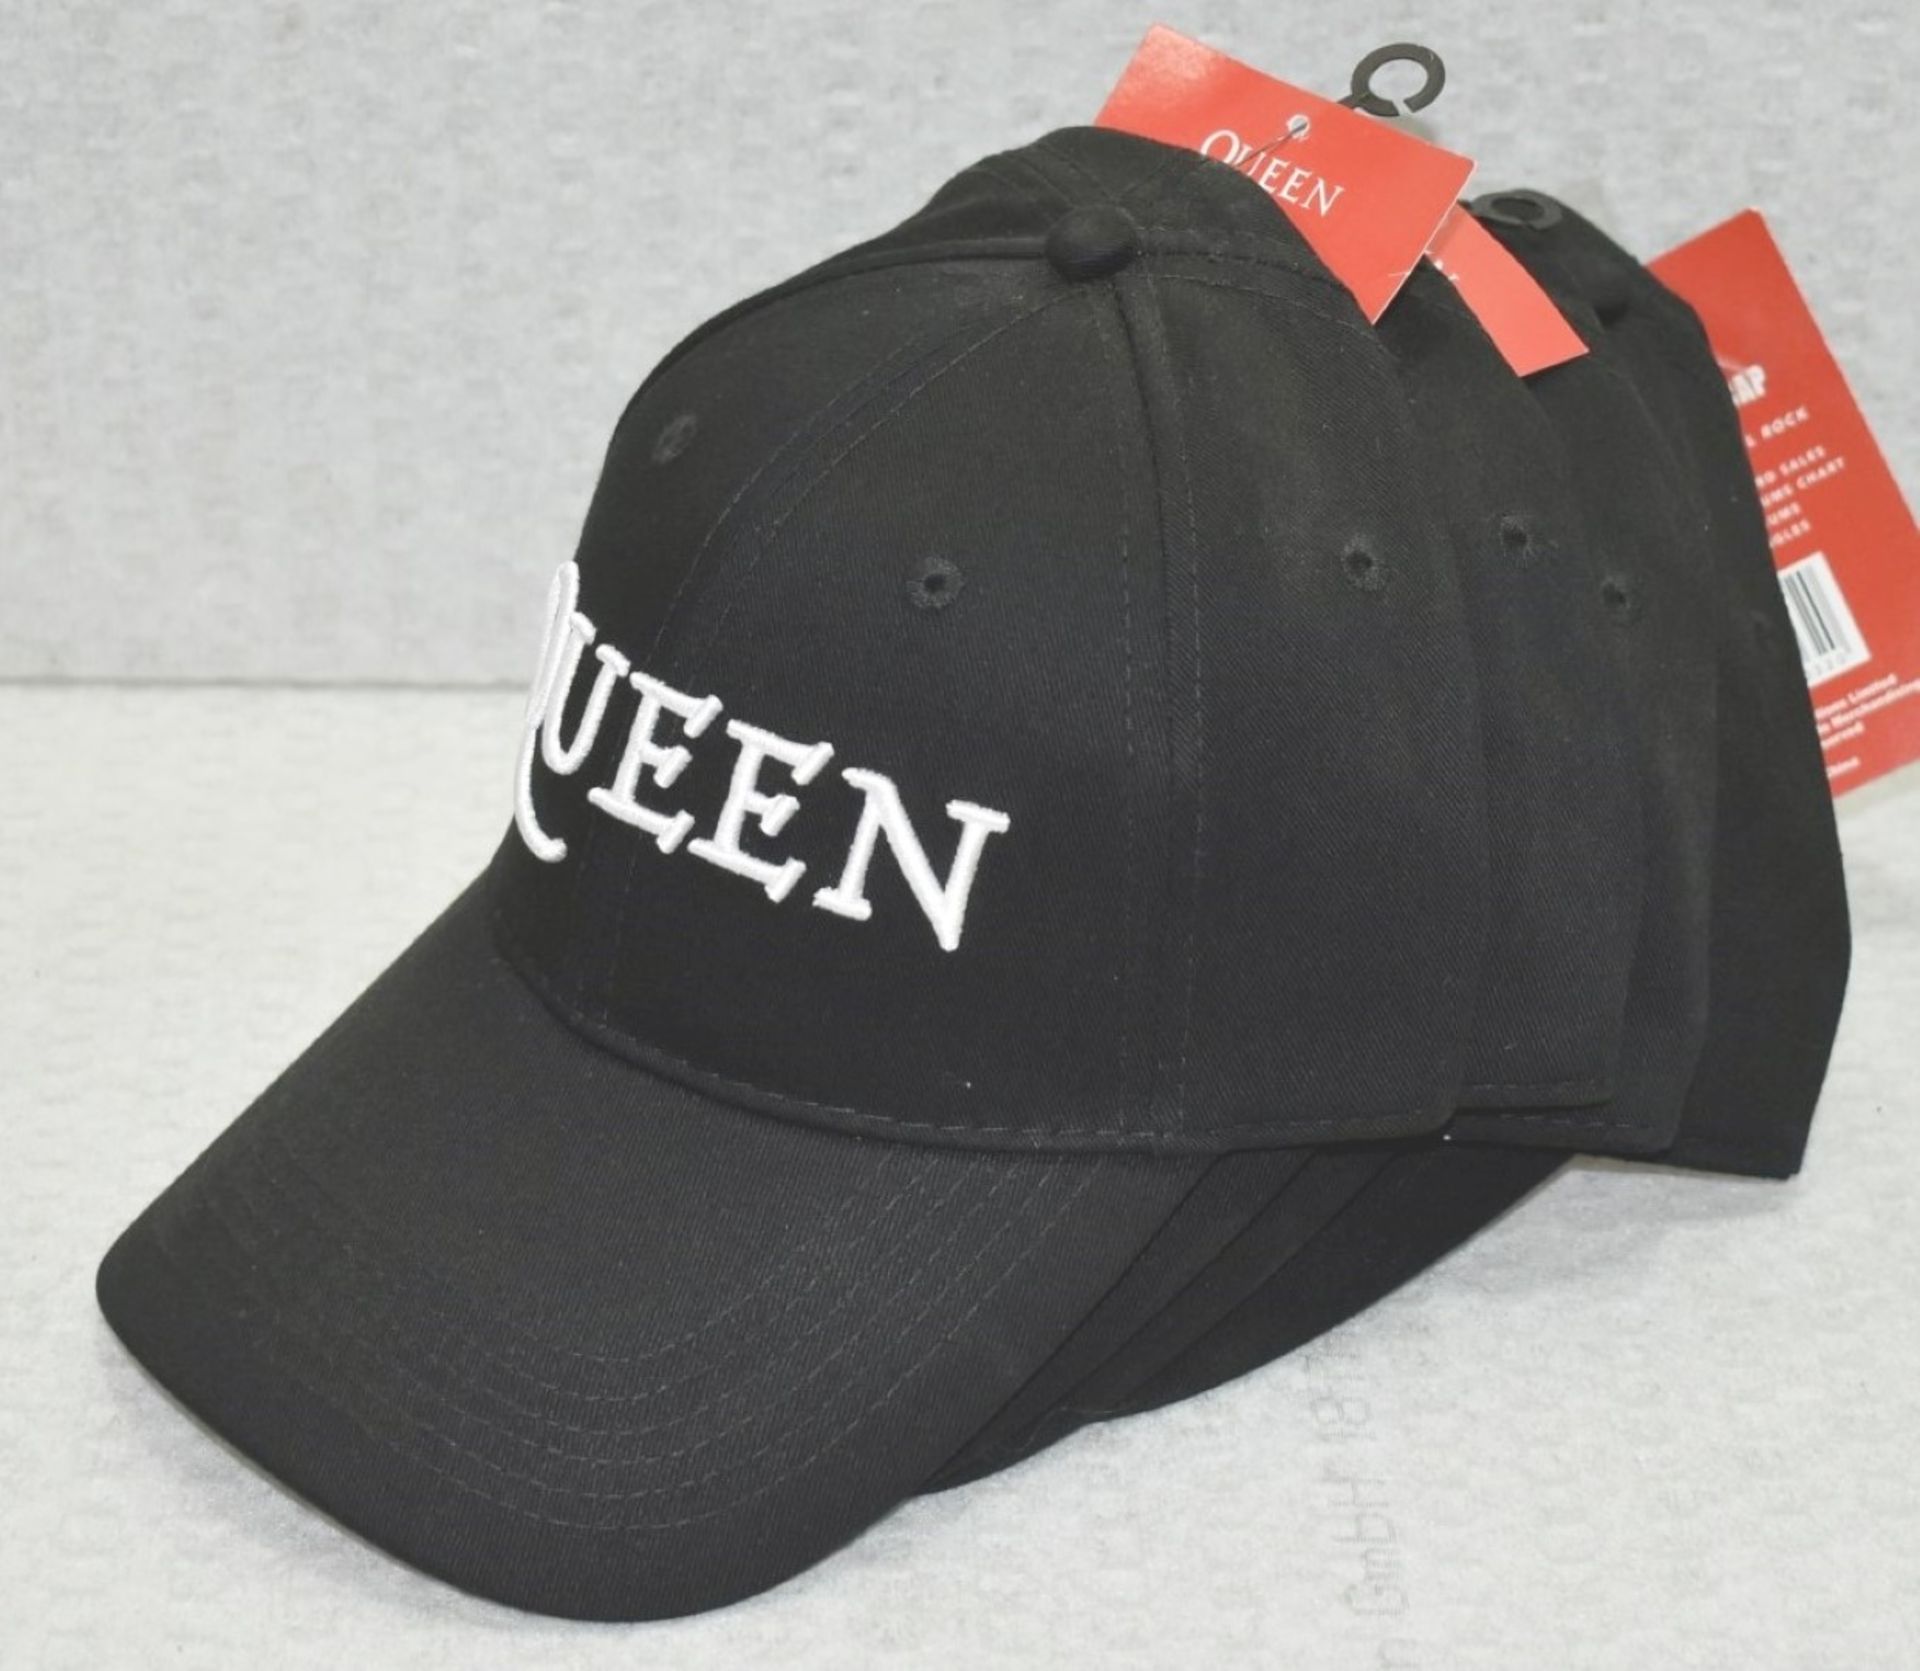 4 x Queen Baseball Caps - Colour: Black - One Size With Adjustable Strap - Officially Licensed - Image 2 of 7